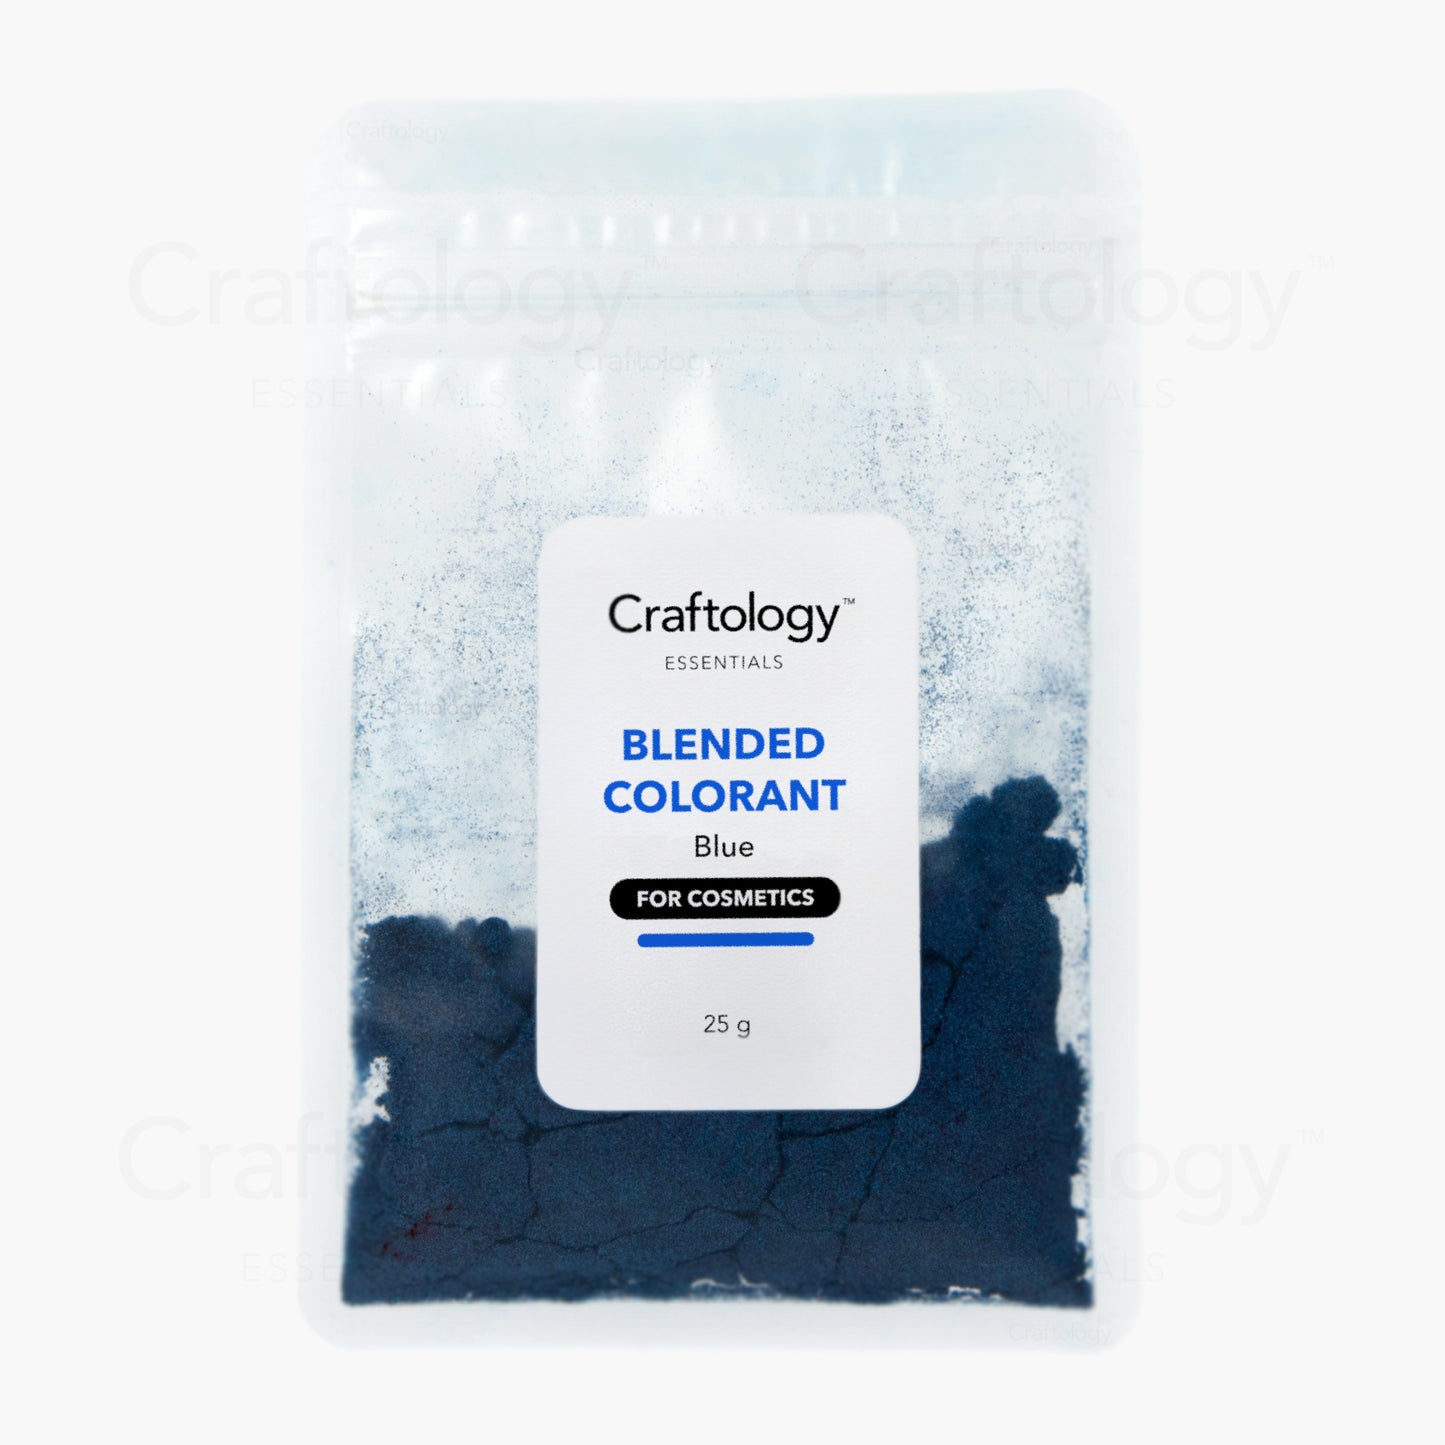 Blended Colorant - Blue - Craftology Essentials - Philippines